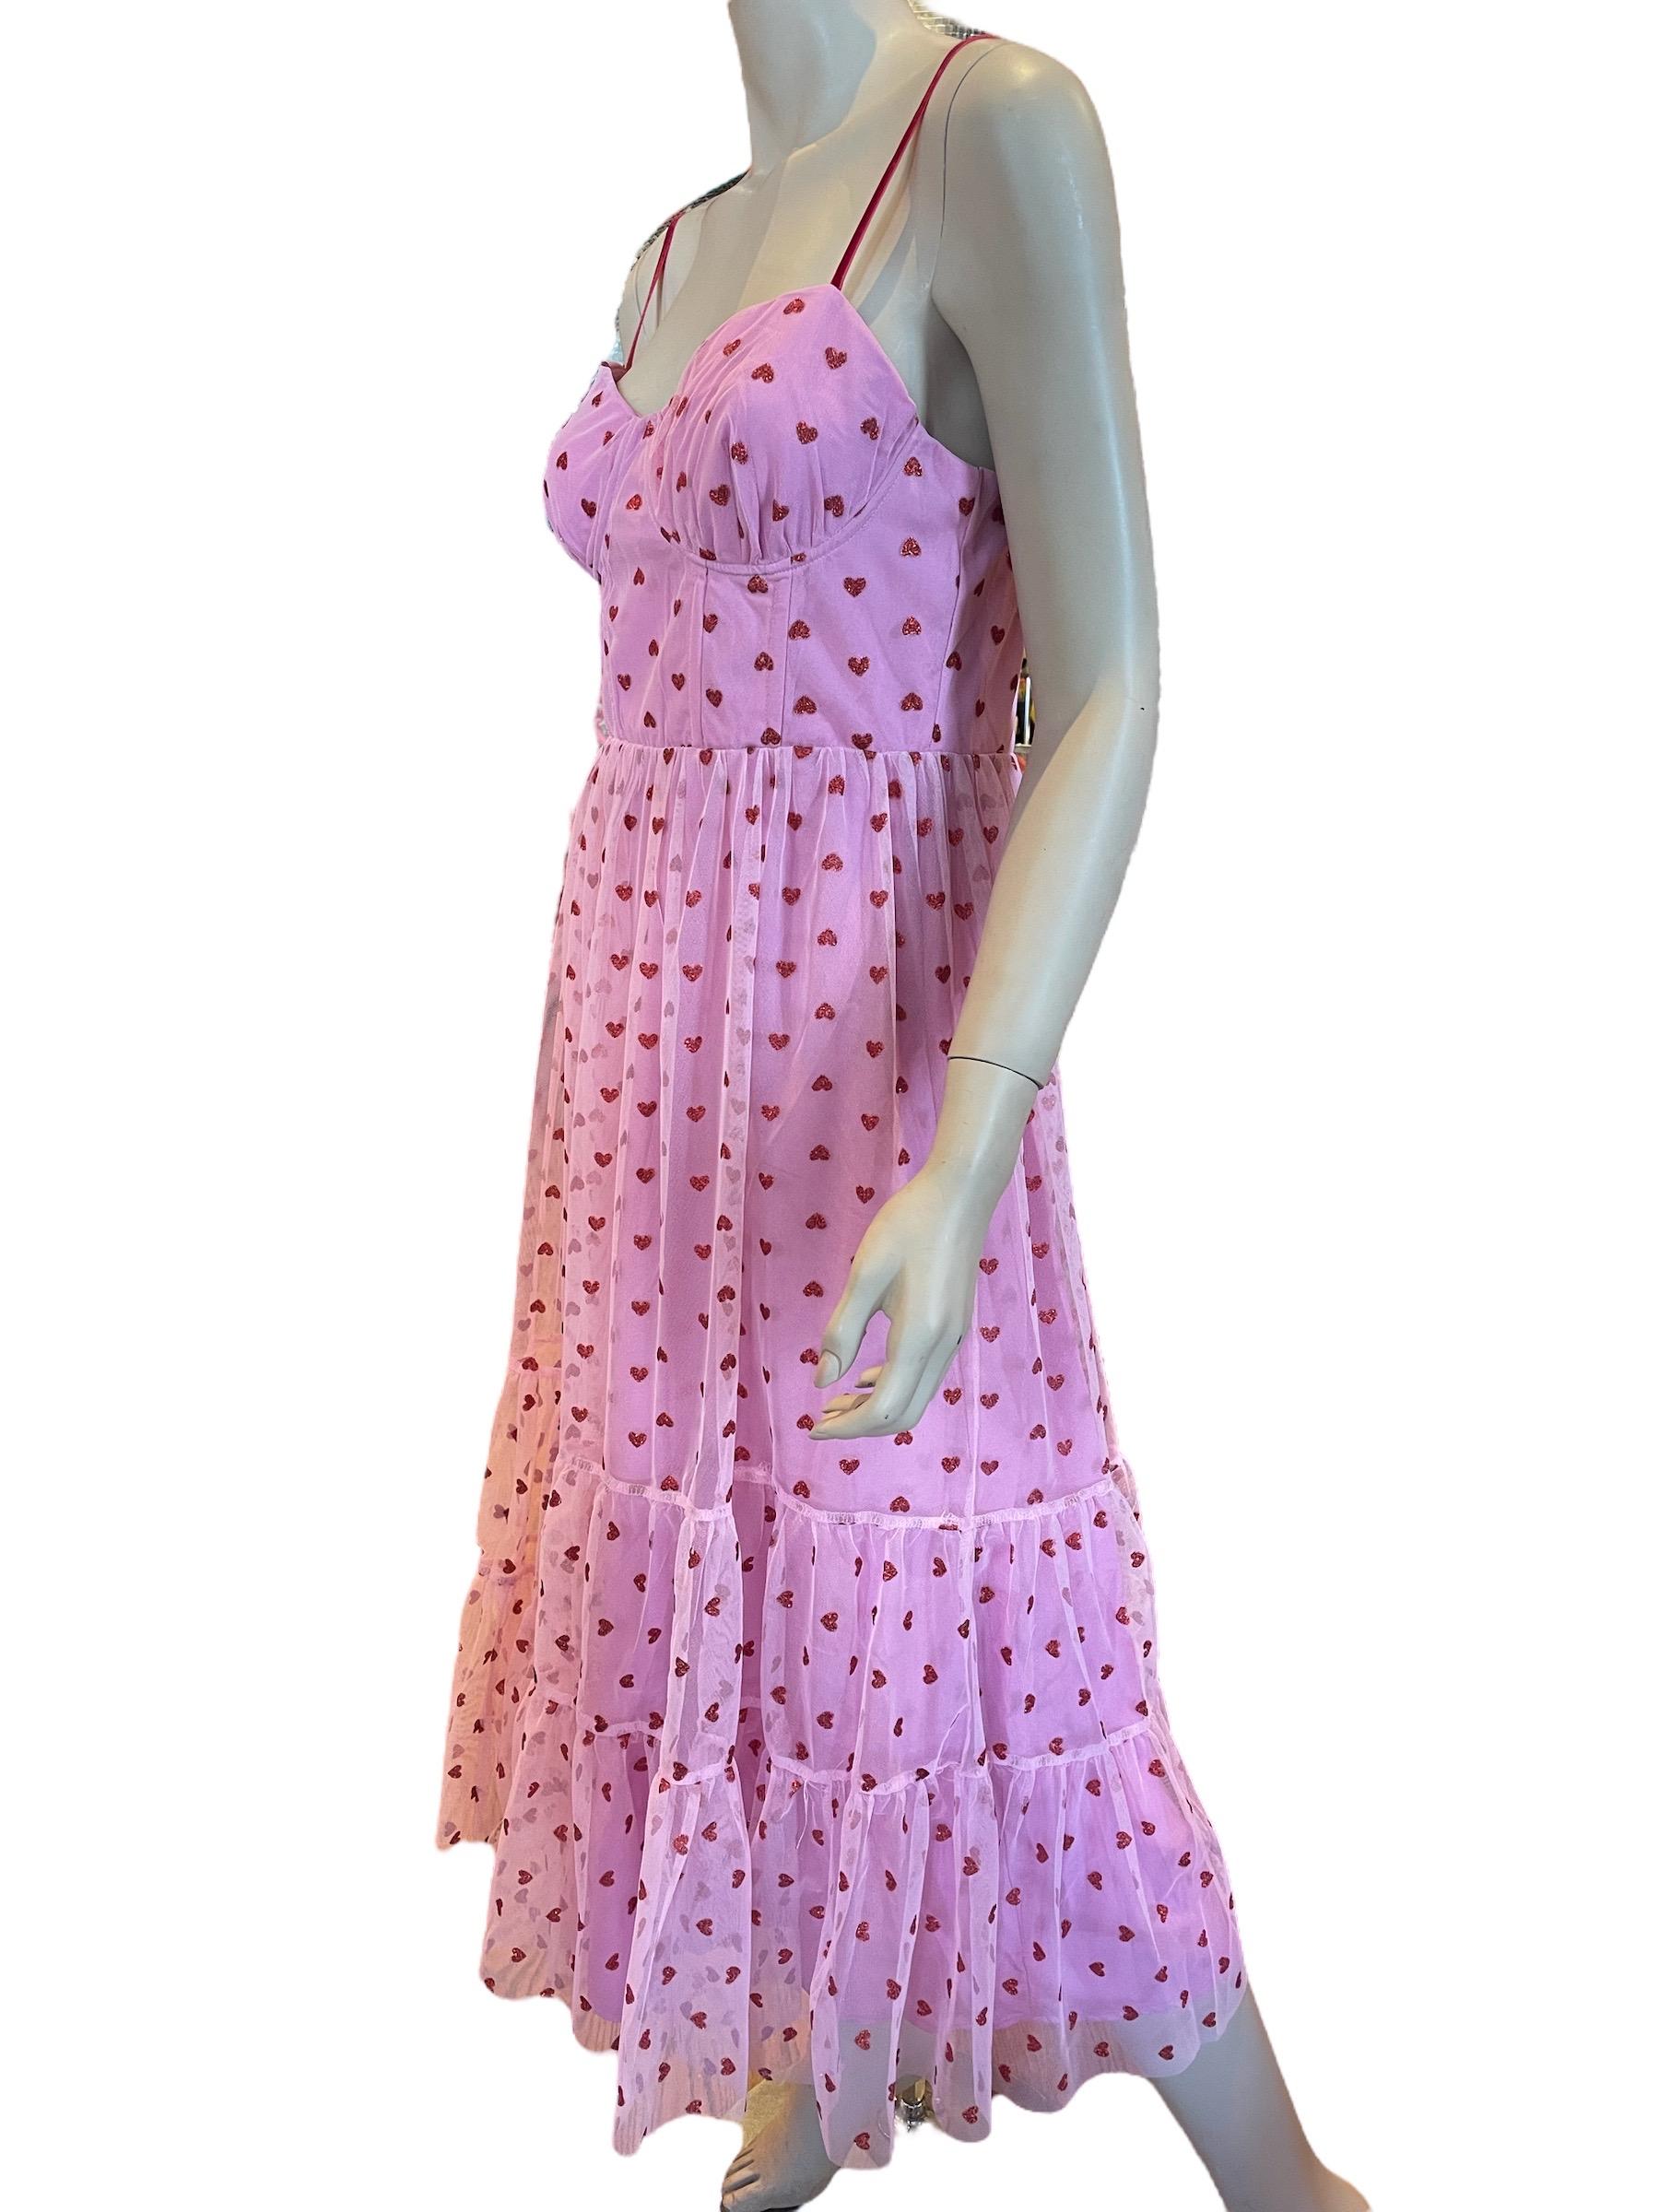 Betsey Johnson Valentines Metallica Heart Print Mesh Dress

Betsey Johnson Valentines Metallica Heart Print Mesh Dress, 
new with tags. Fitted through the chest and waist. Has a tiered skirt, sparkly heart print, and sweetheart neckline. Back zipper